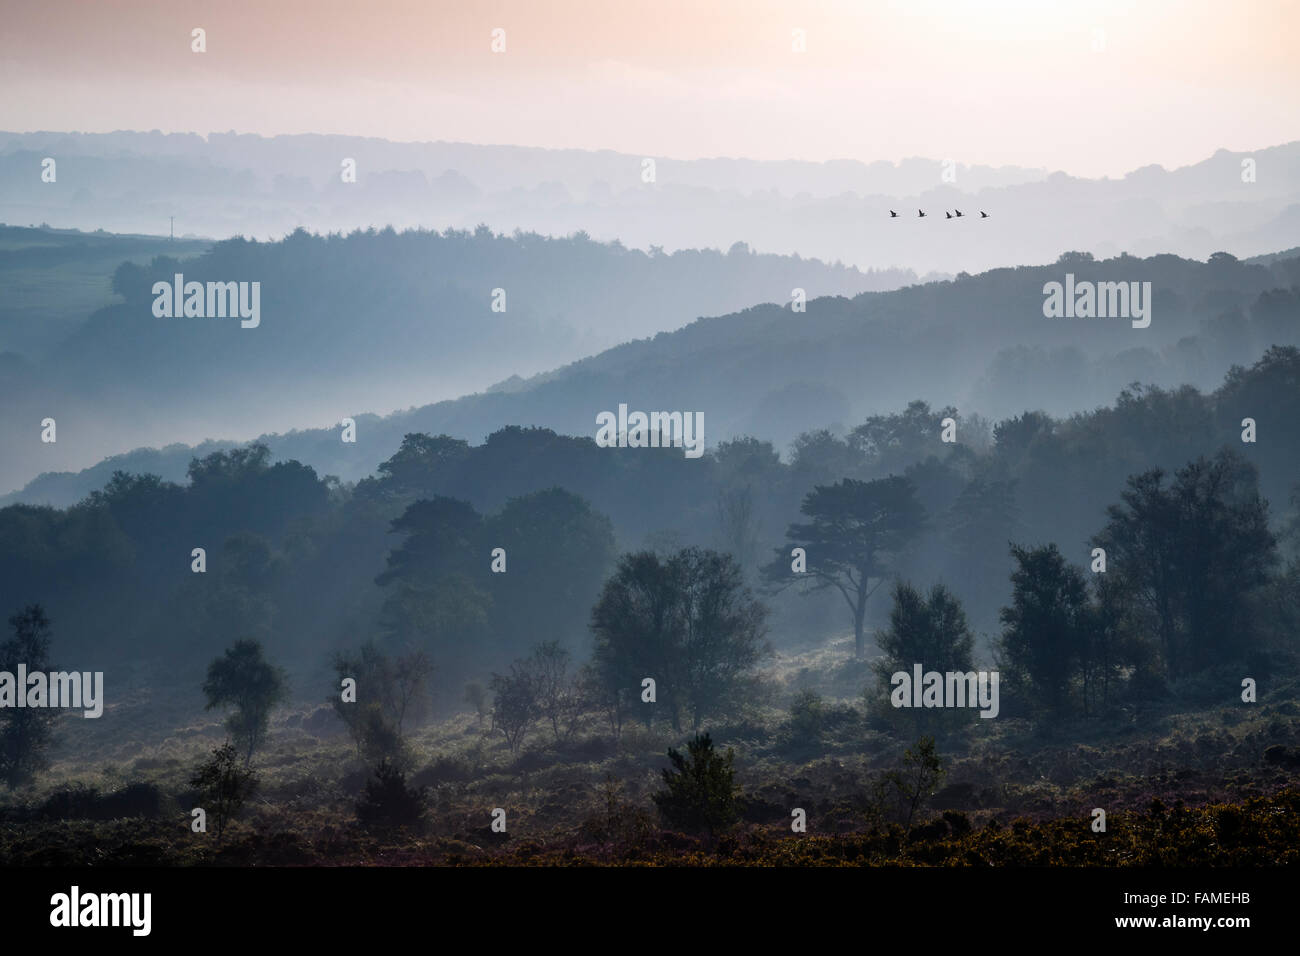 A distant flock of geese, flying over the misty woodland landscape of Exmoor national park. Stock Photo